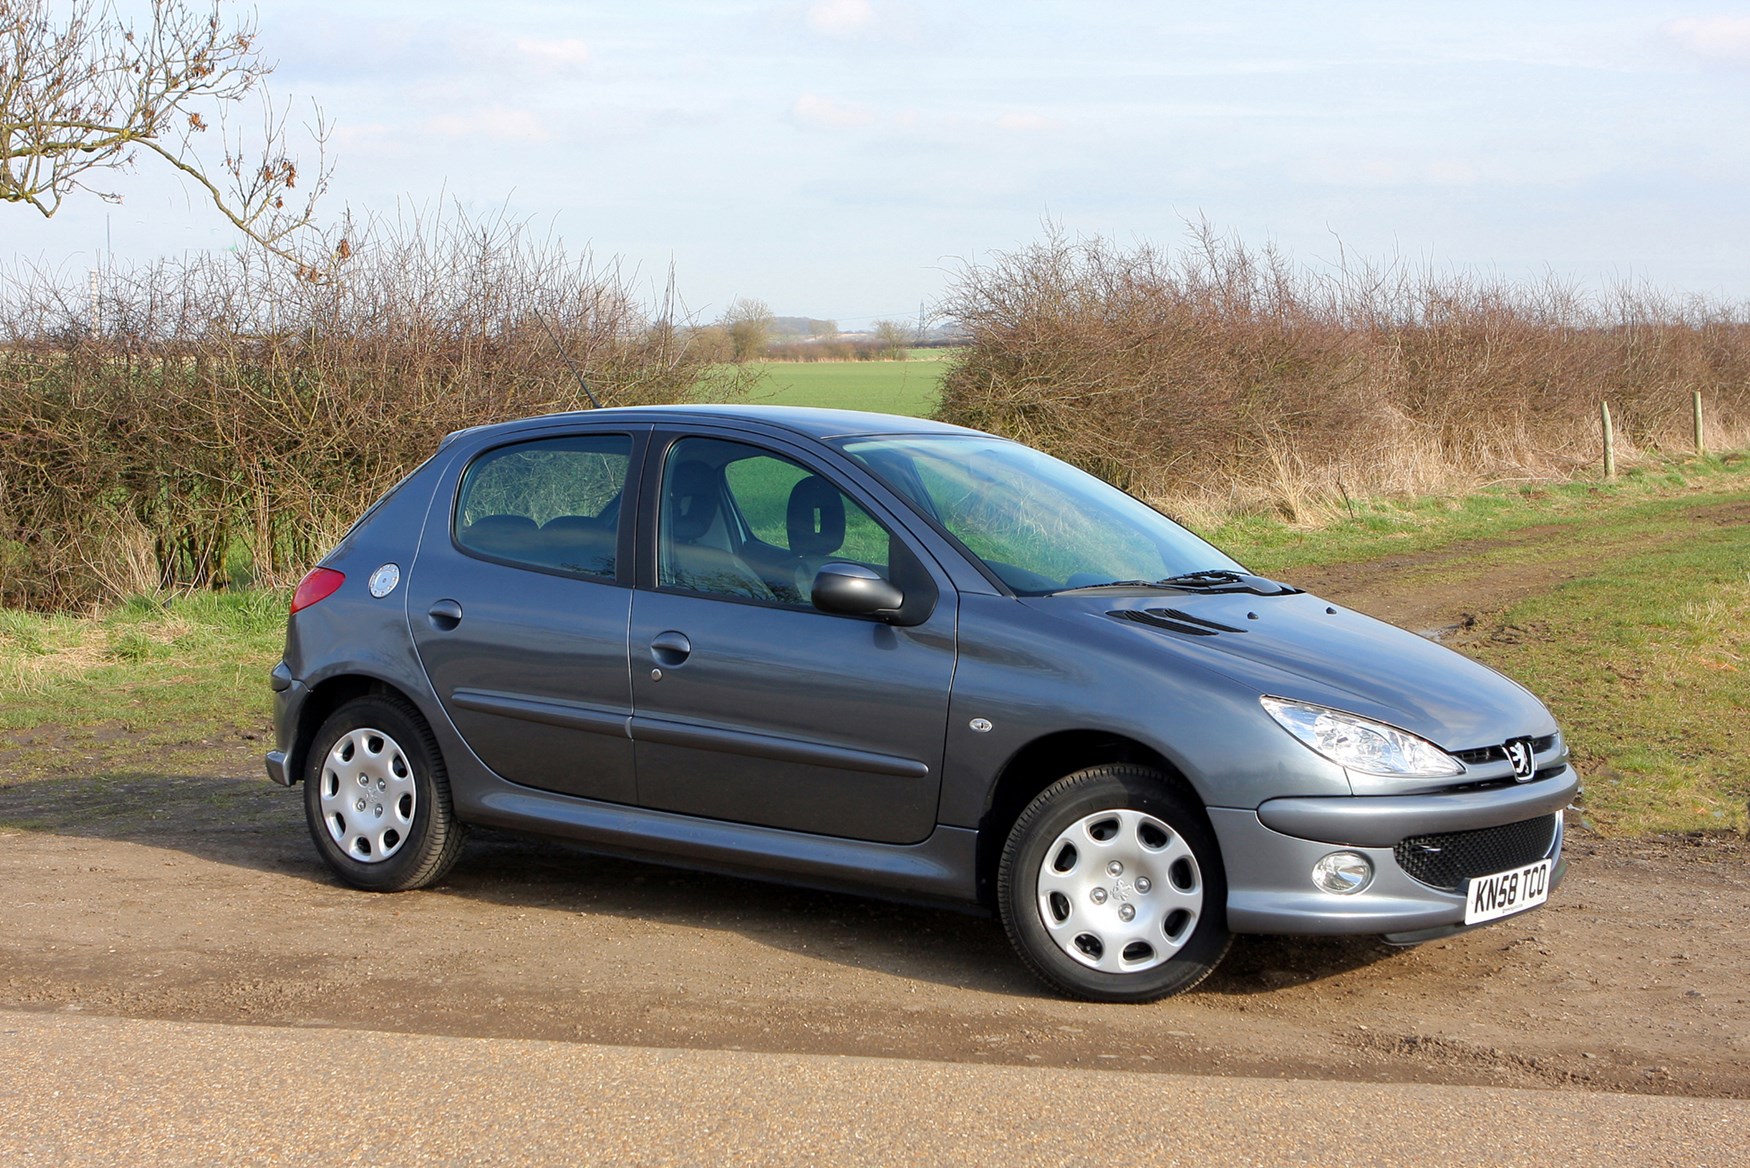 Peugeot 206 Hatchback 1998 2009 Features Equipment And